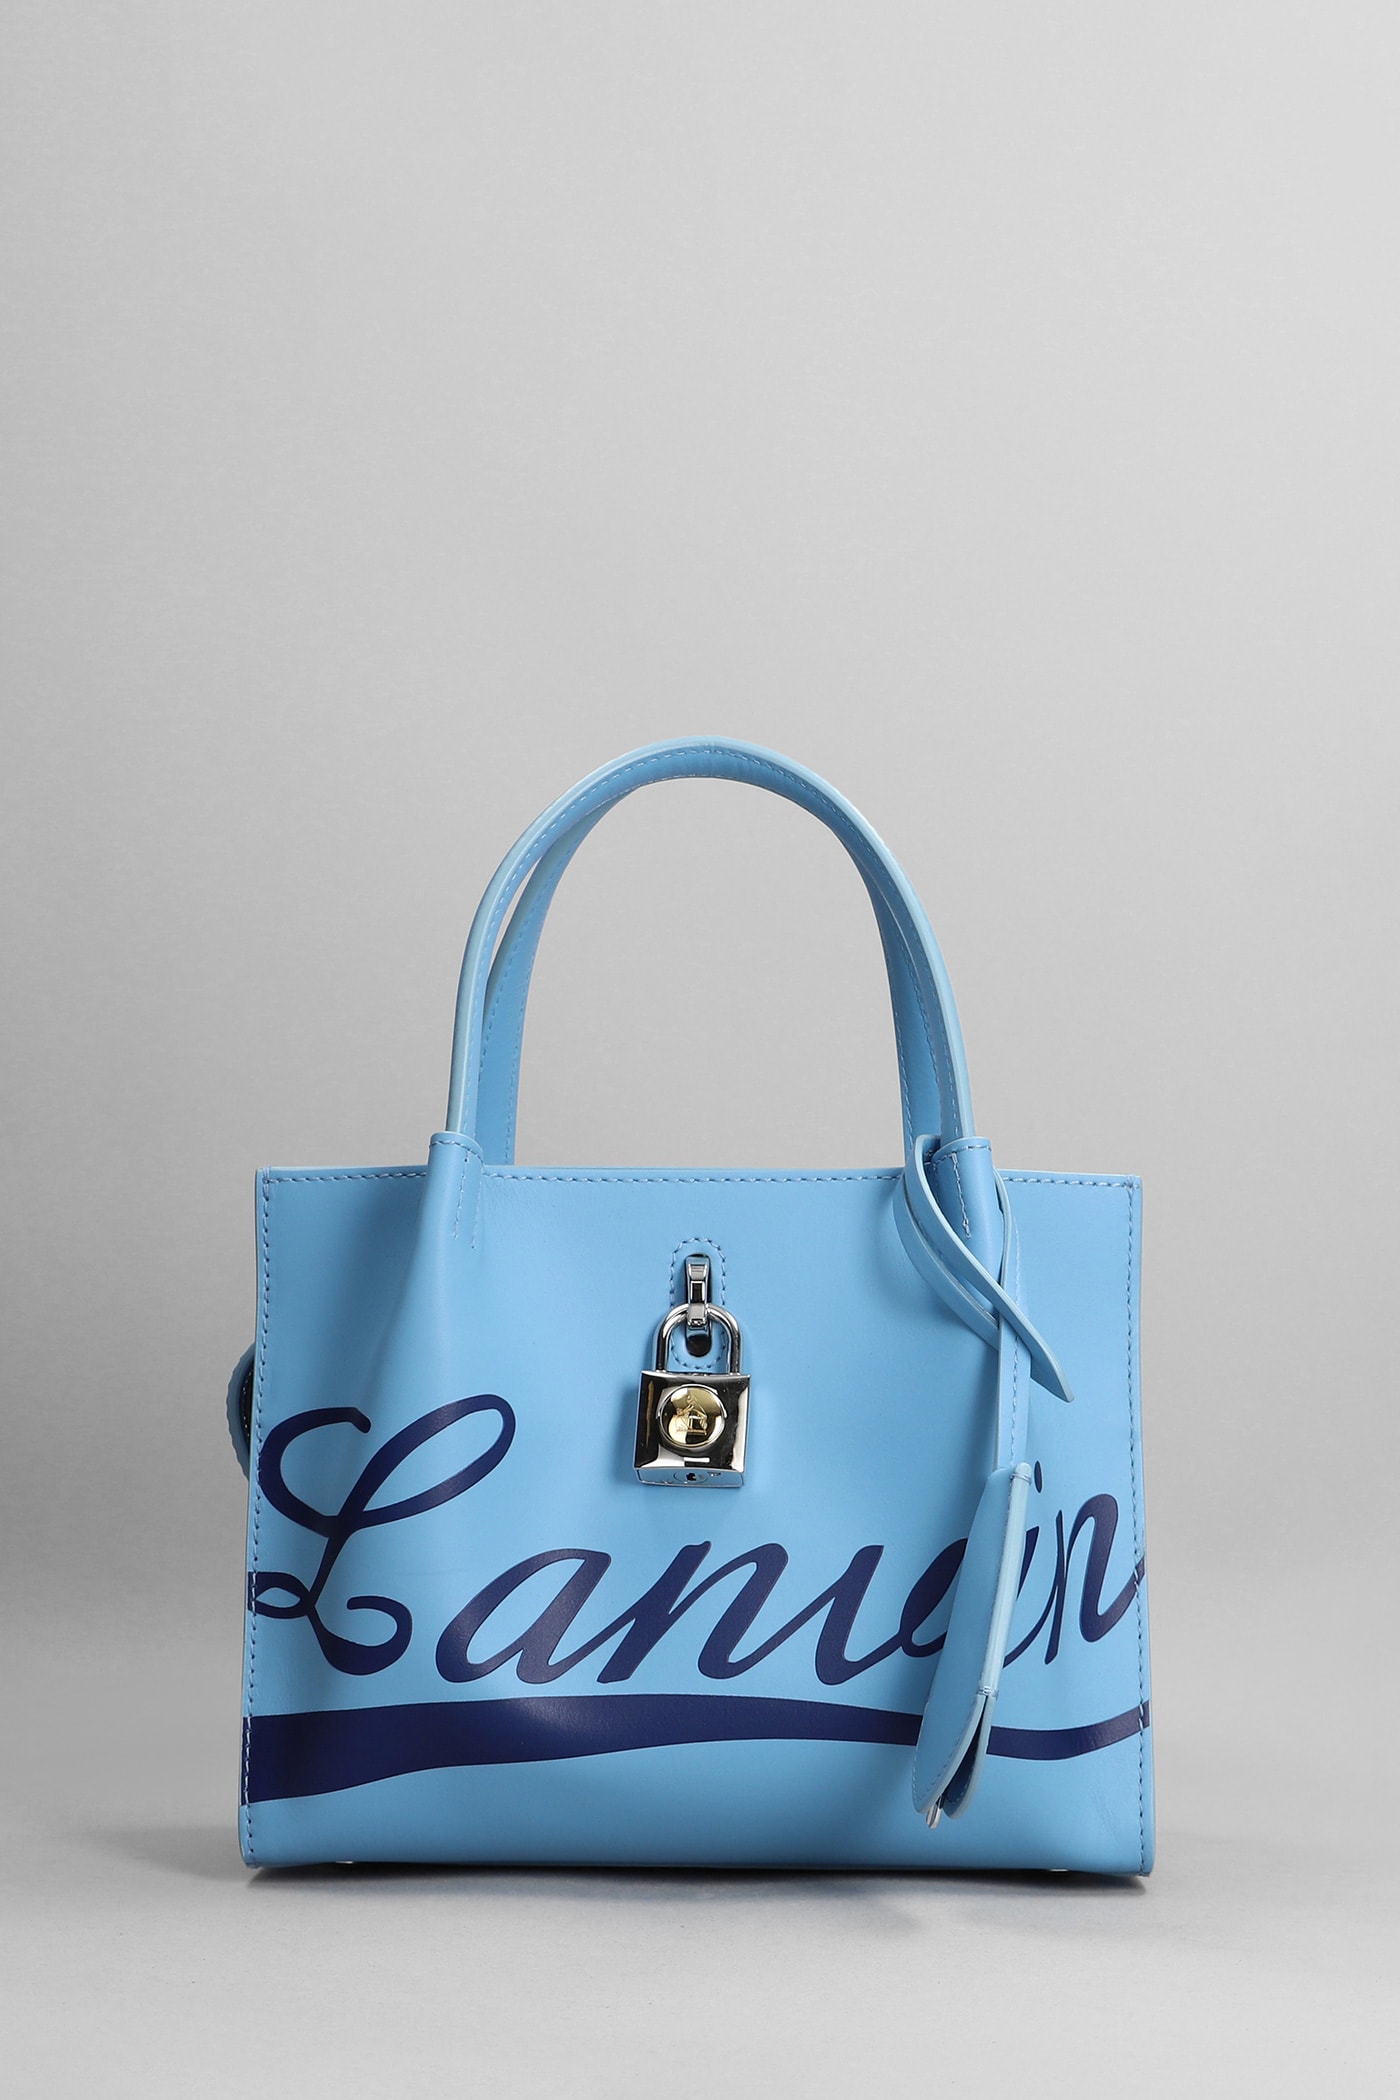 Lanvin Tote In Blue Leather